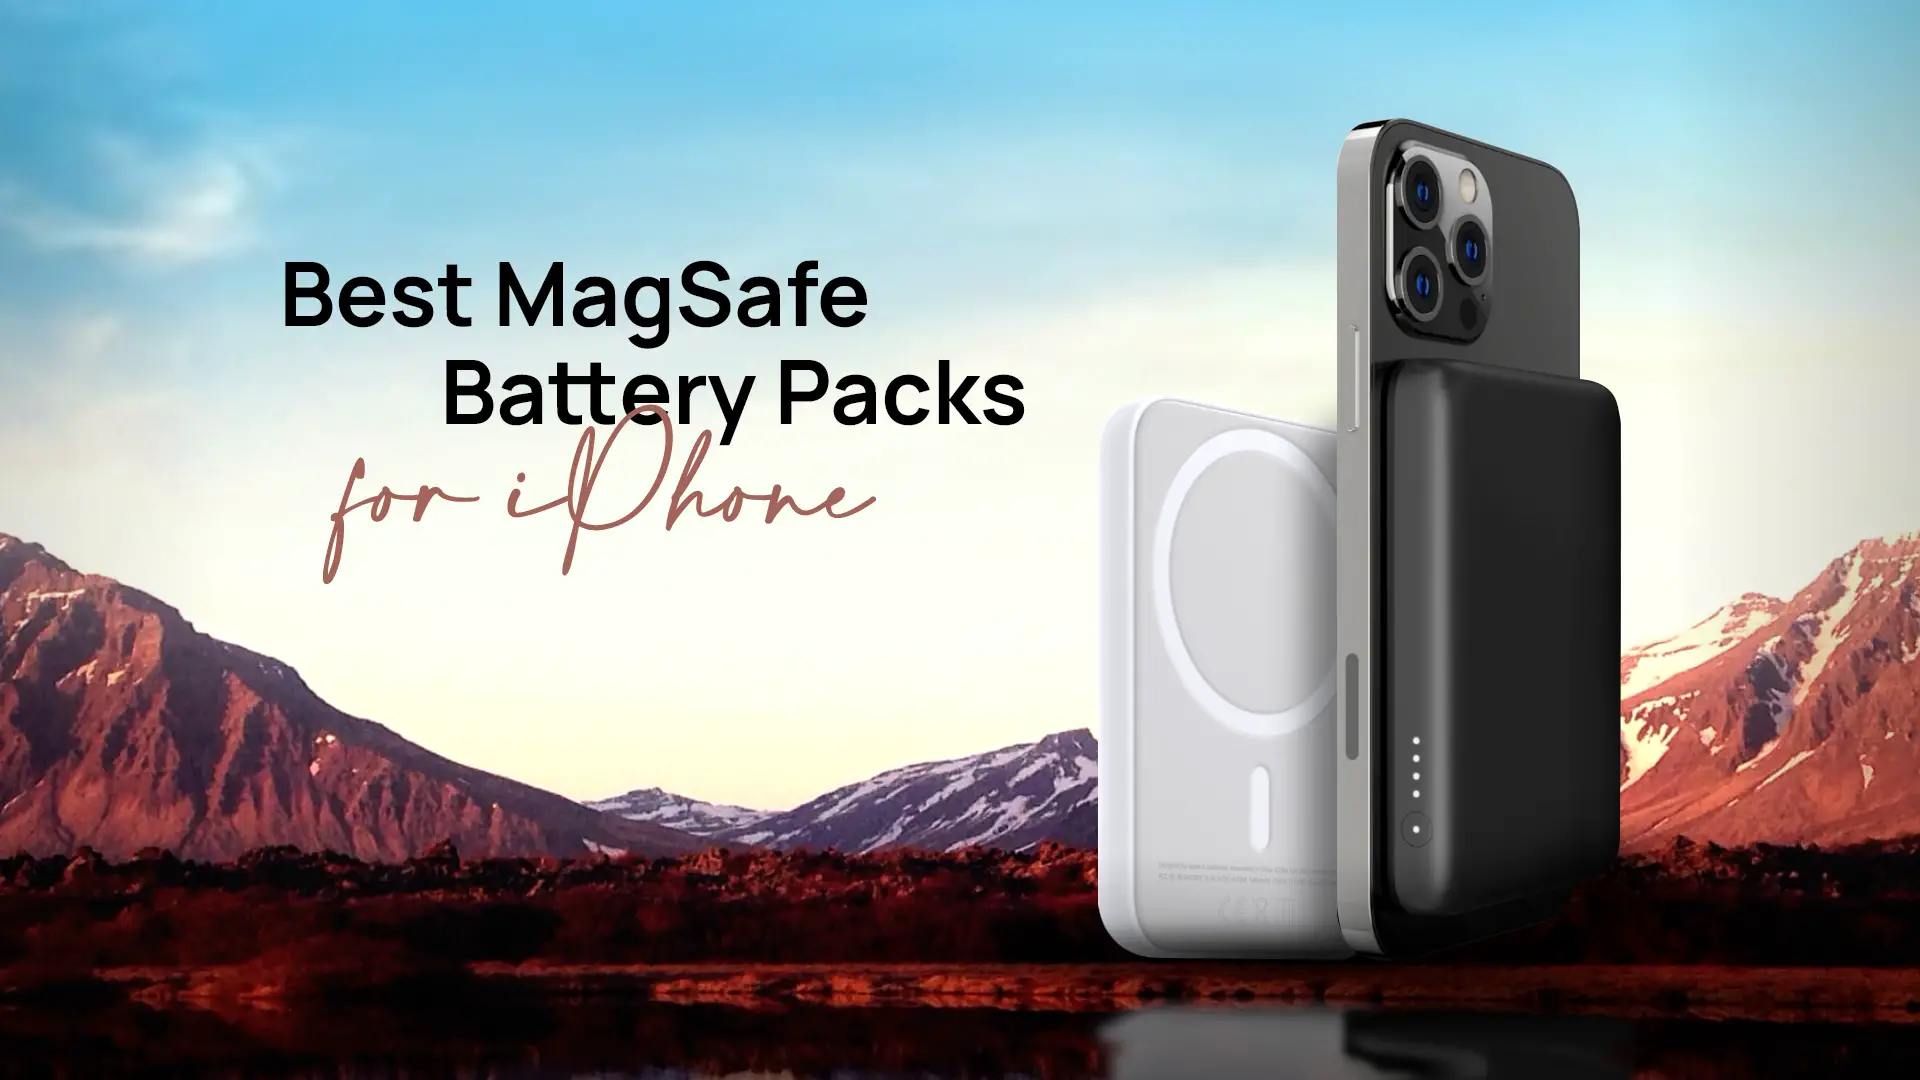 10 Best MagSafe Battery Packs for iPhone in 2022